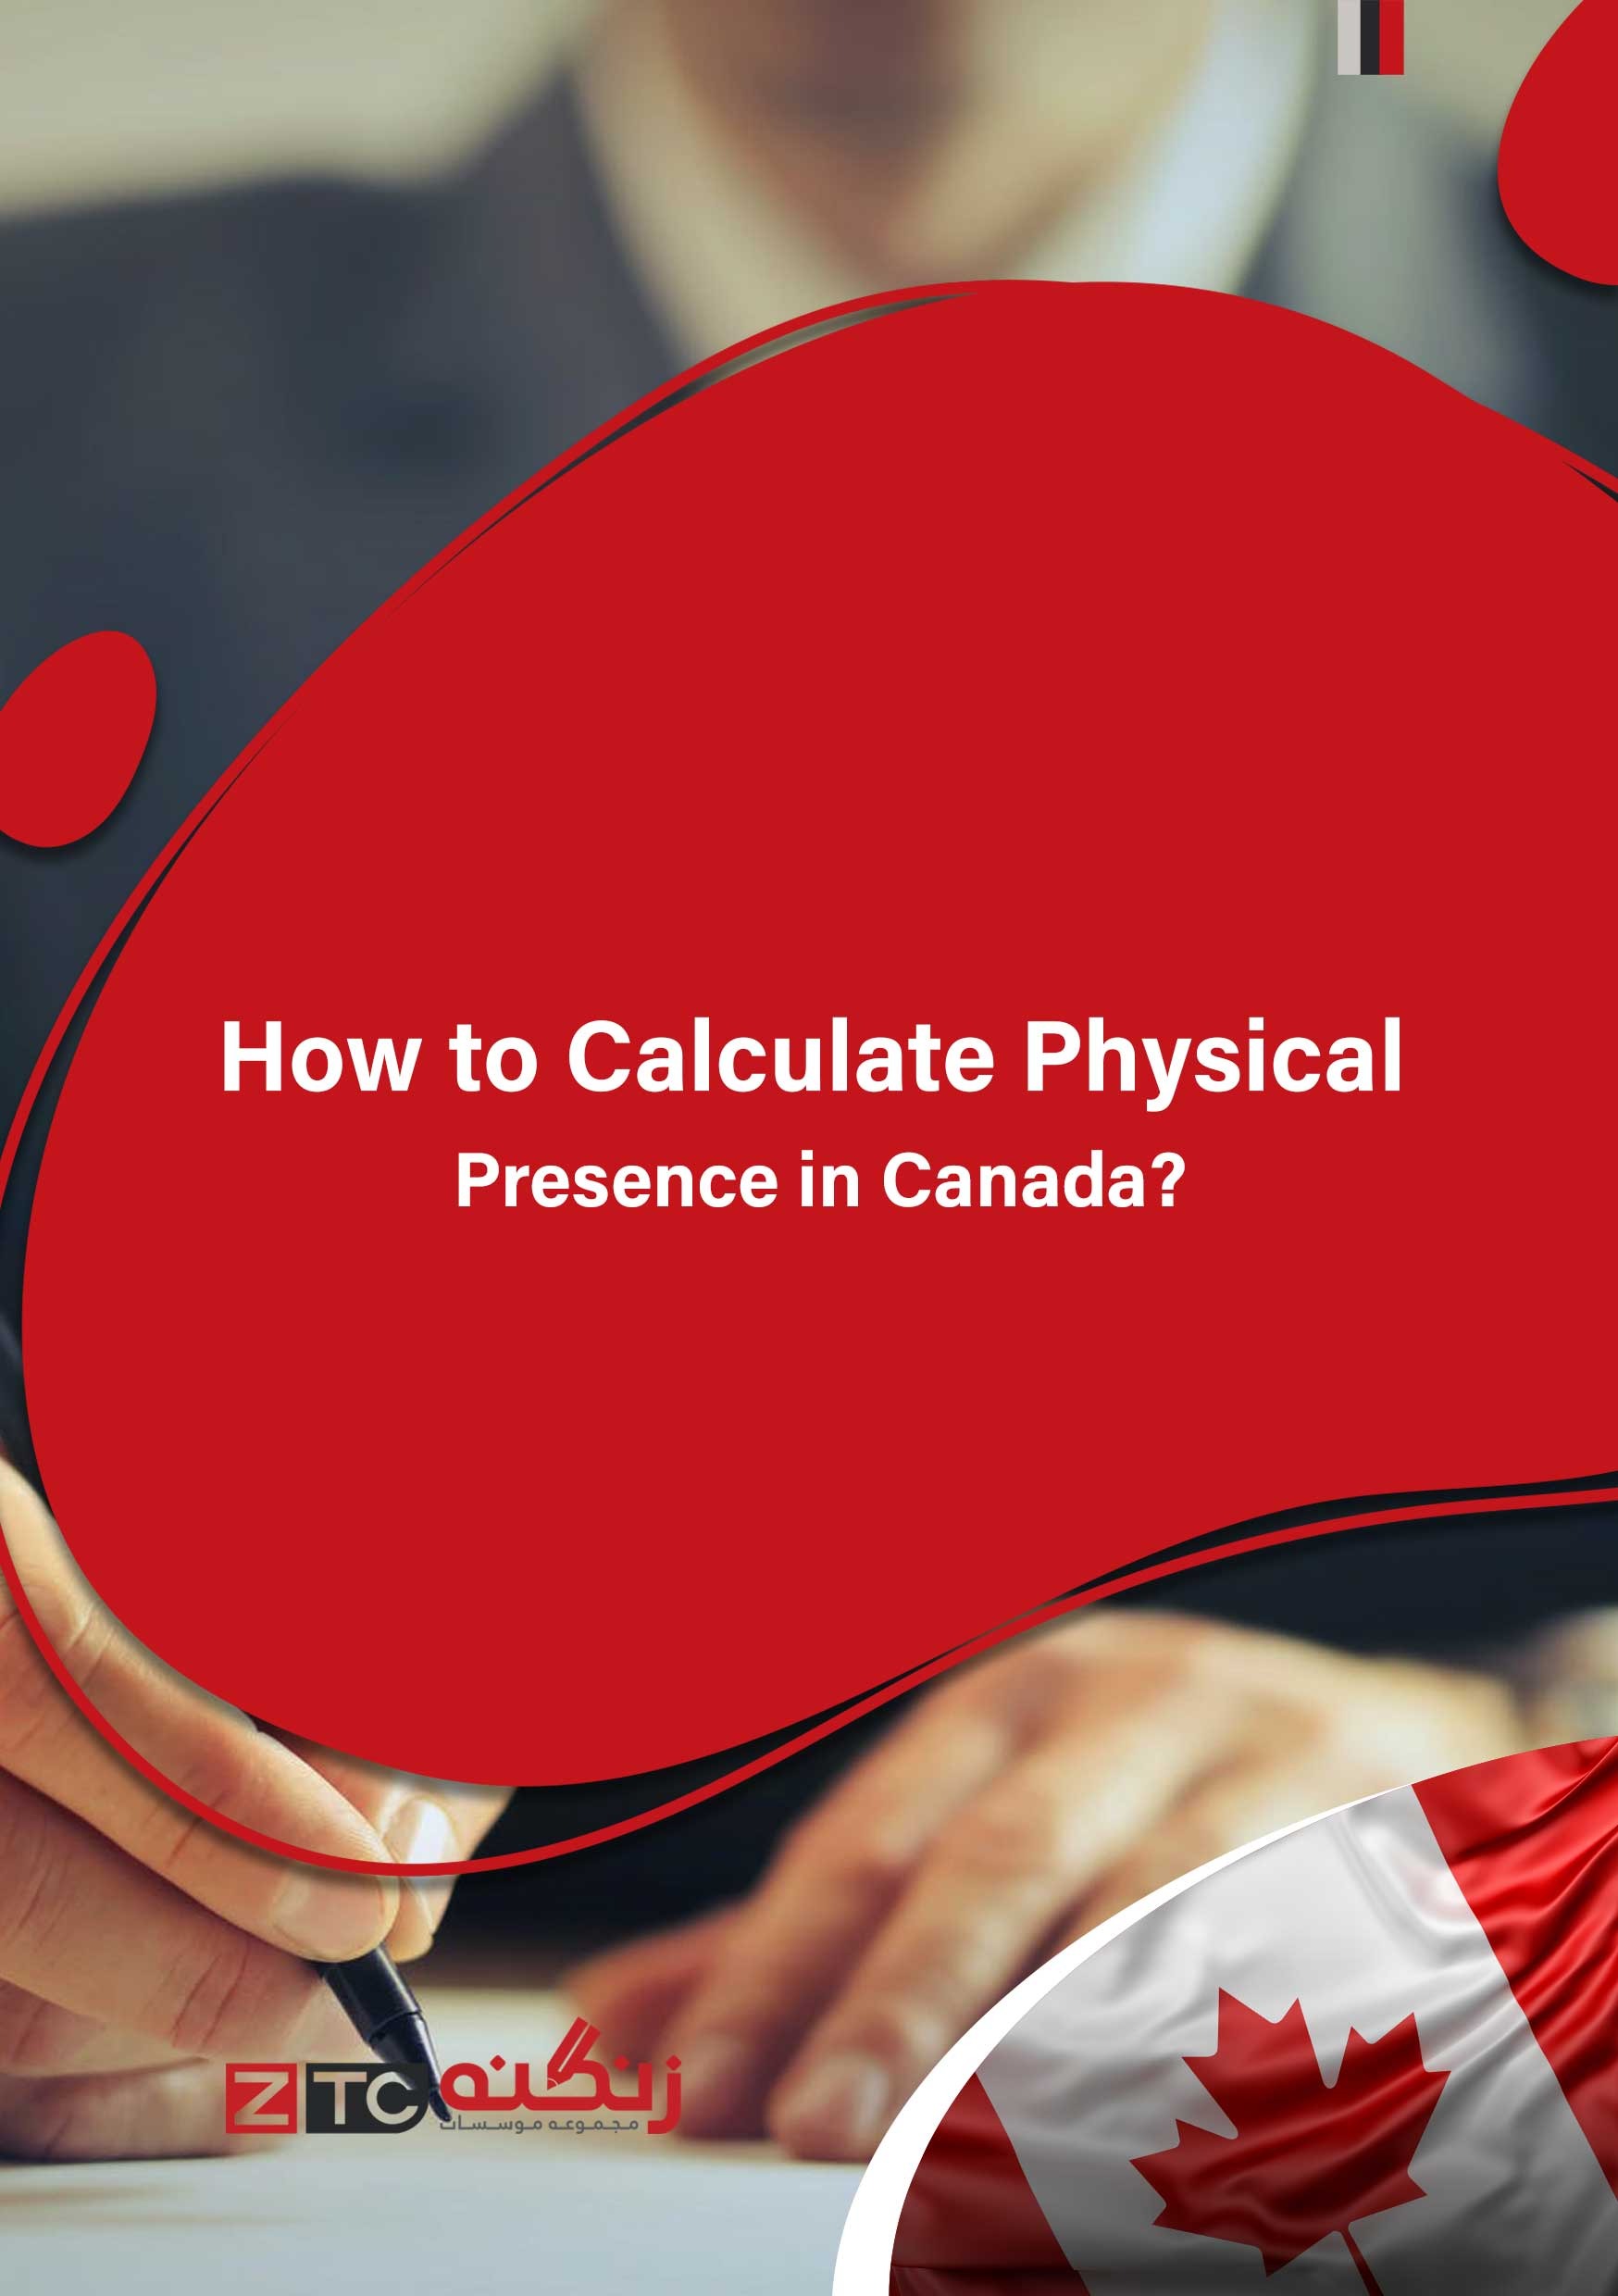 How to Calculate Physical Presence in Canada?